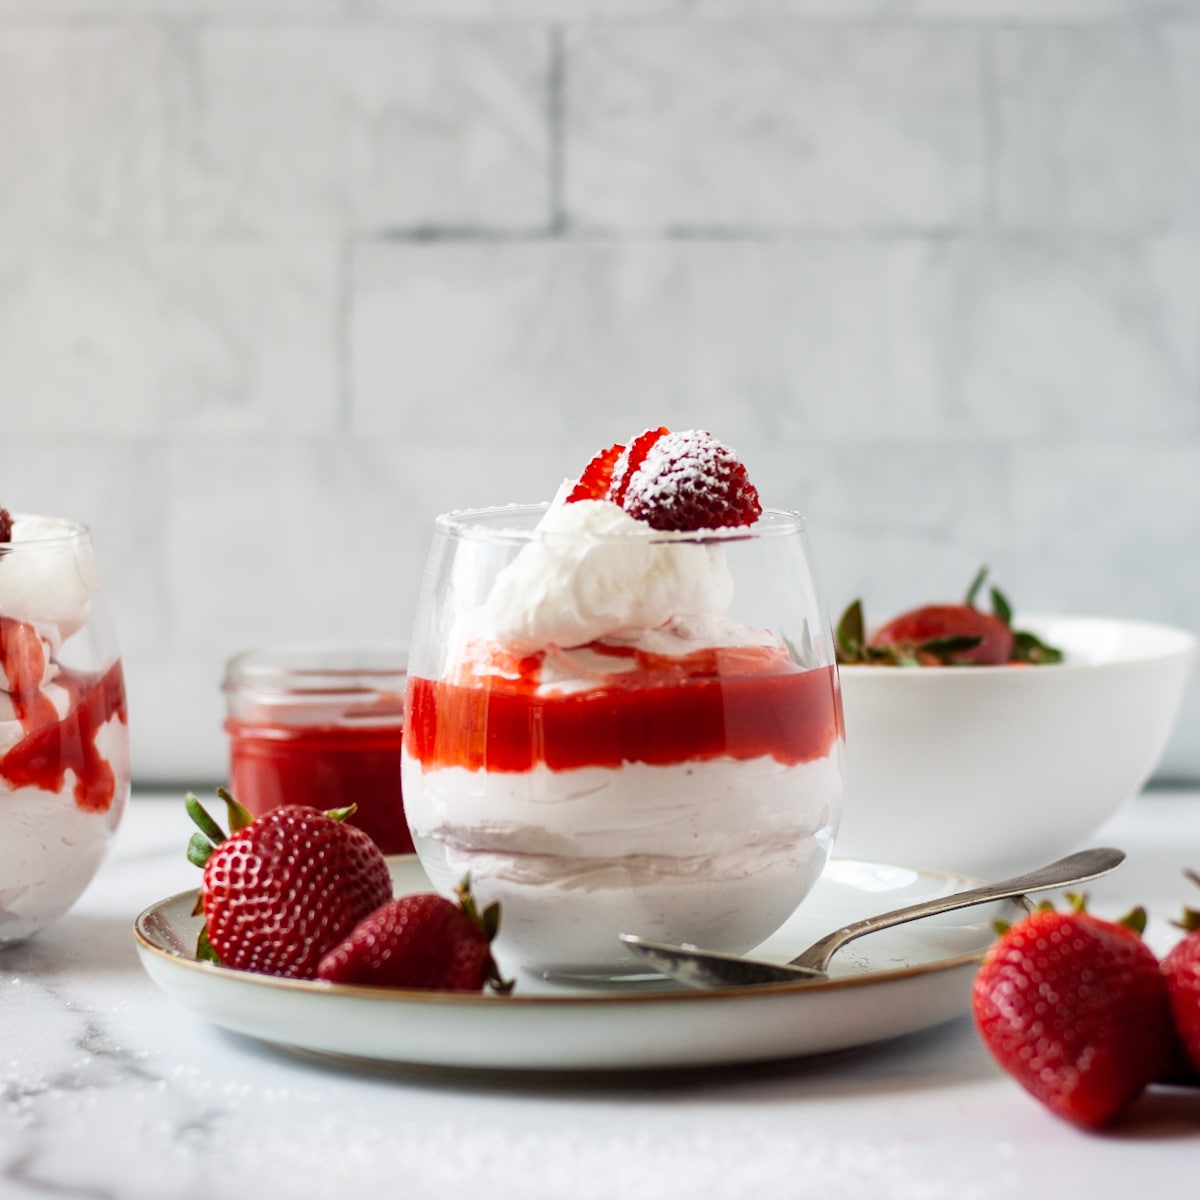 Strawberry mousse in a glass with strawberries and whipped cream.